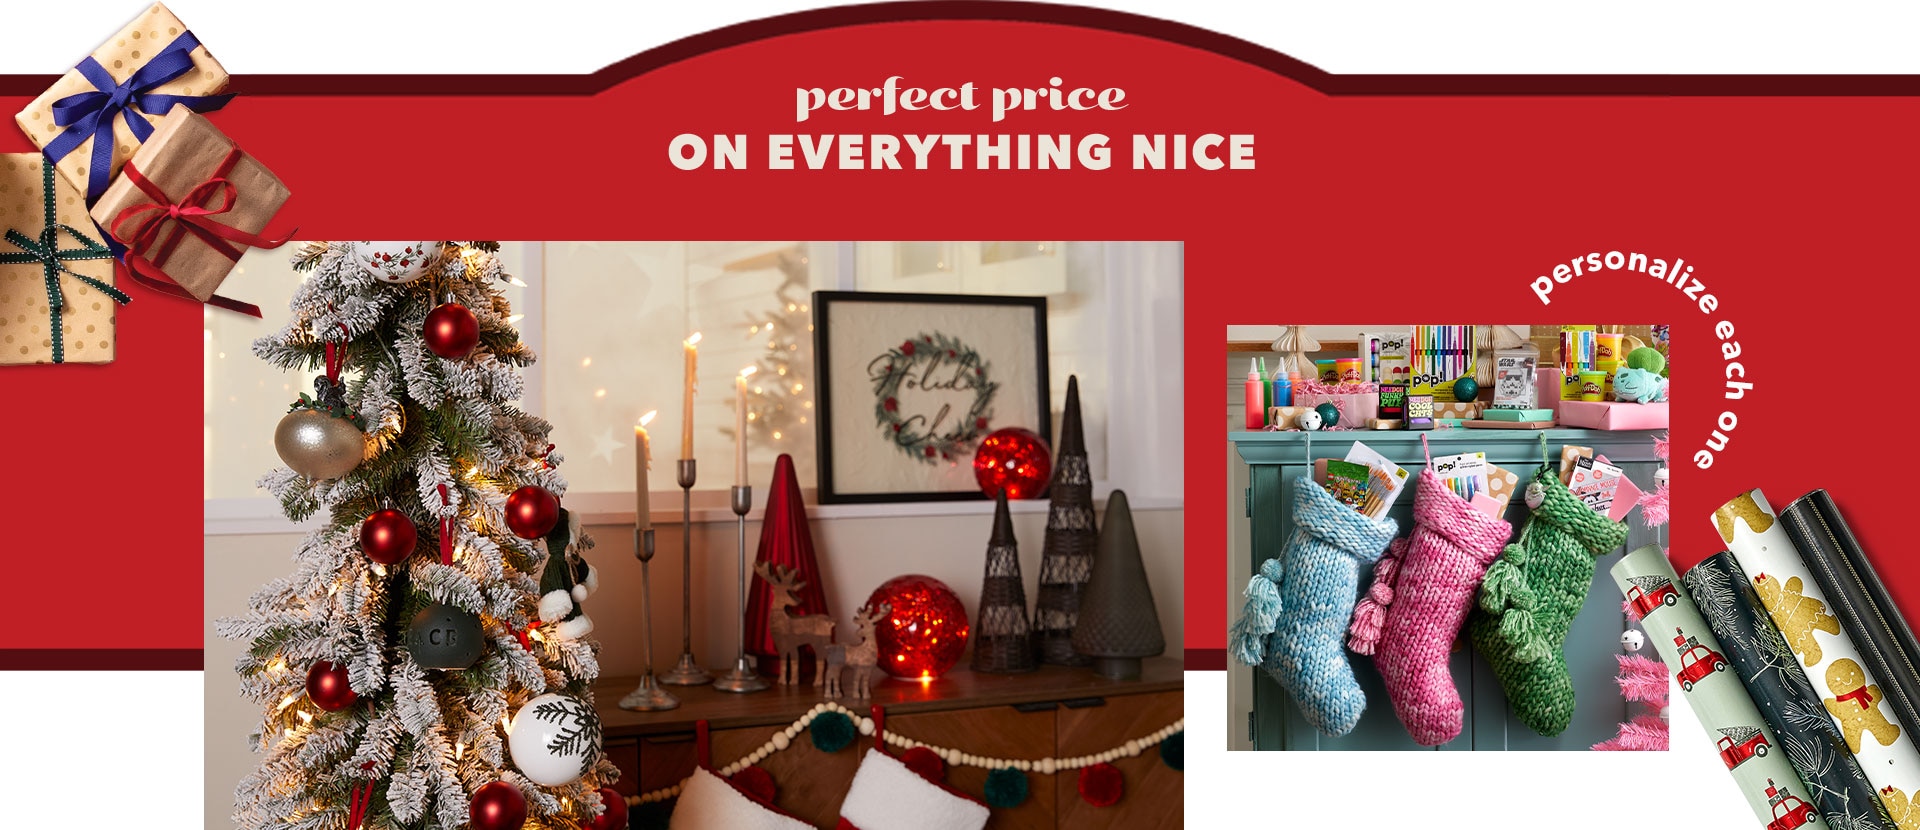 Perfect price on everything nice for the holidays